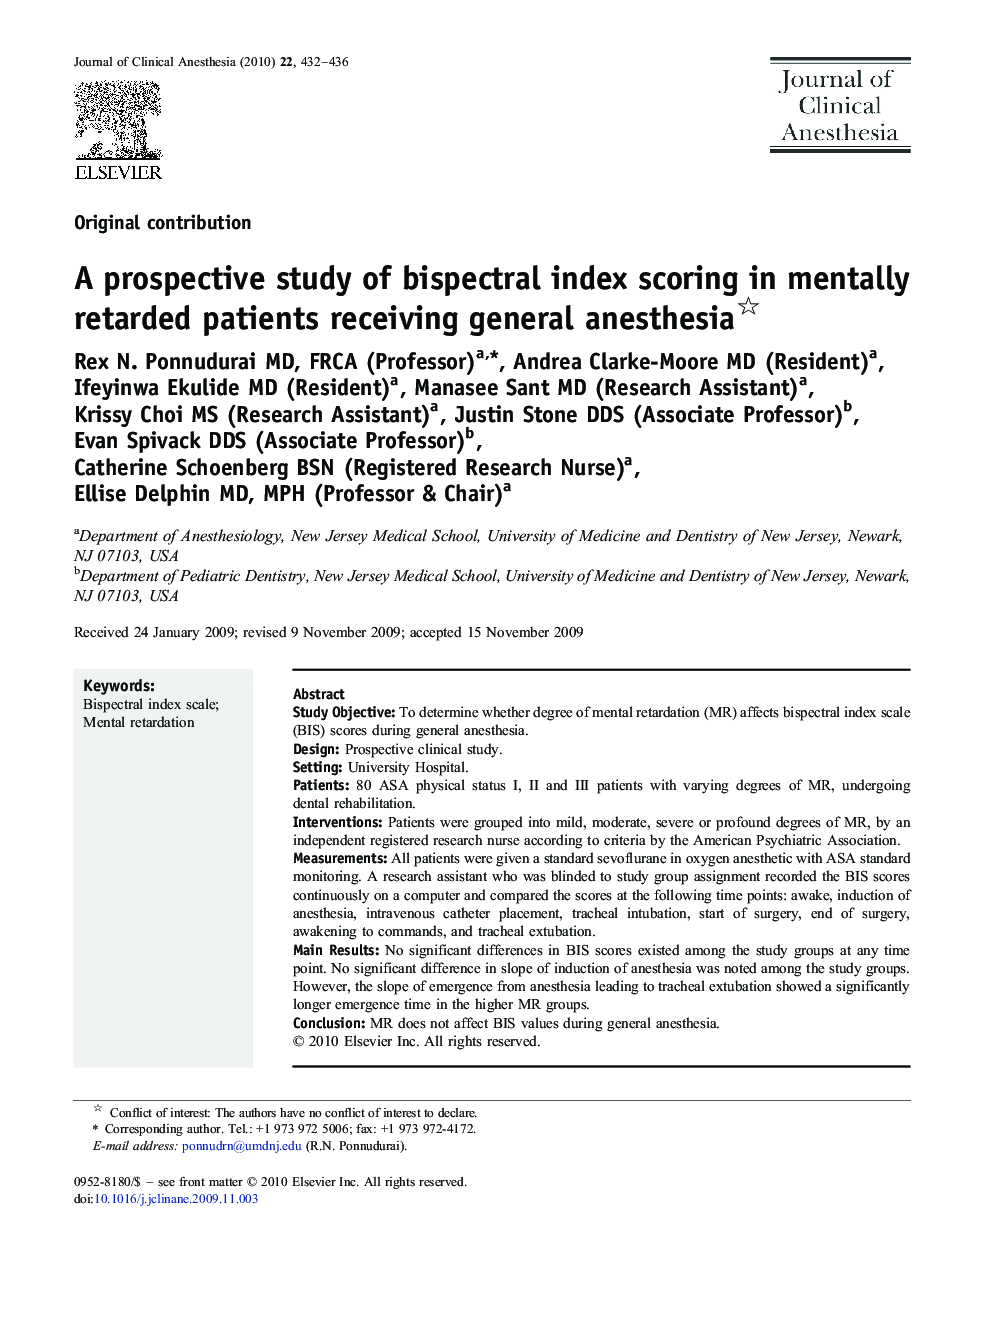 A prospective study of bispectral index scoring in mentally retarded patients receiving general anesthesia 